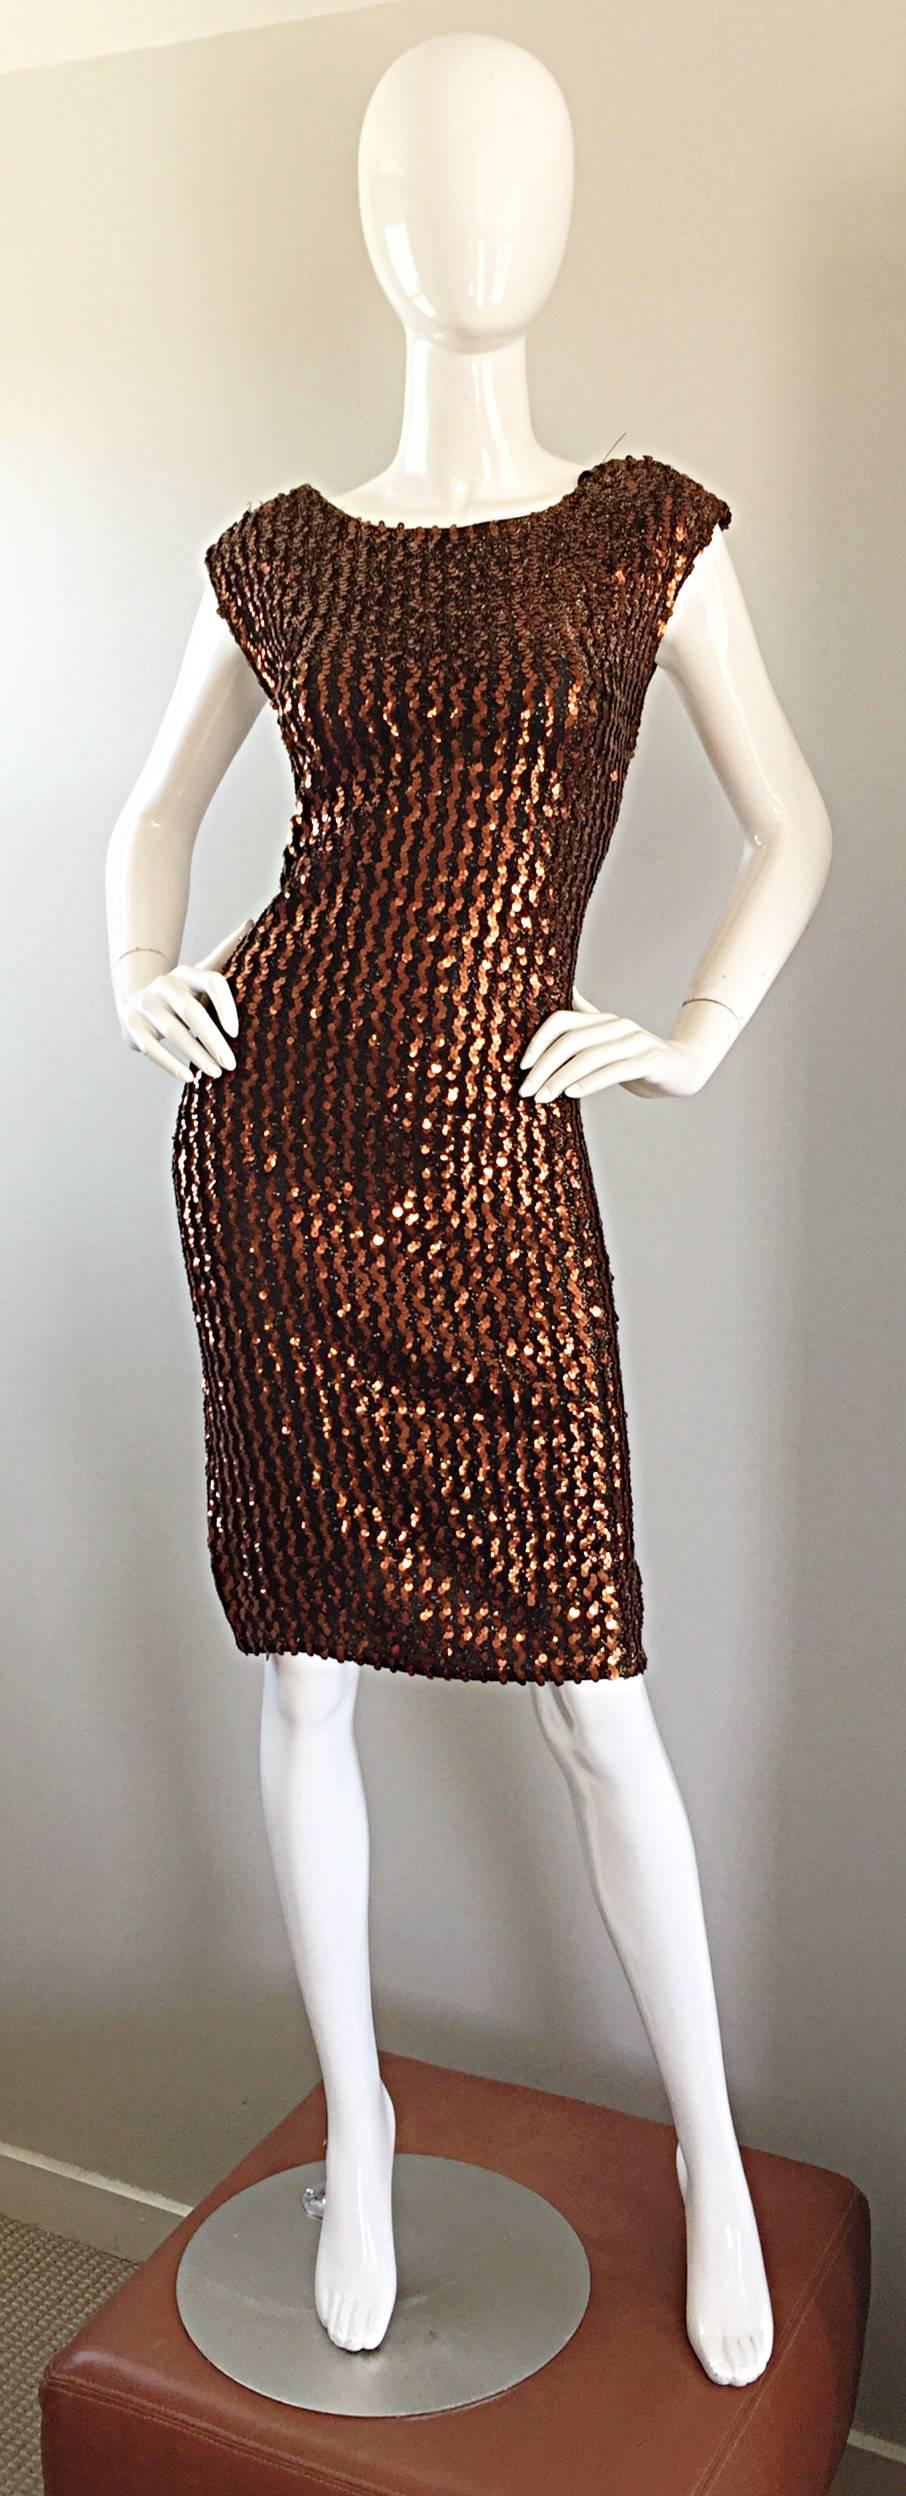 Sexy vintage ELLEN WARREN for DAVID HOWARD 70s bronze knit sequin dress! Channel your inner disco self in the stunning bodycon number! Plunging back reveals just the right amount of skin. Flattering cap sleeves, with an impressive fit that